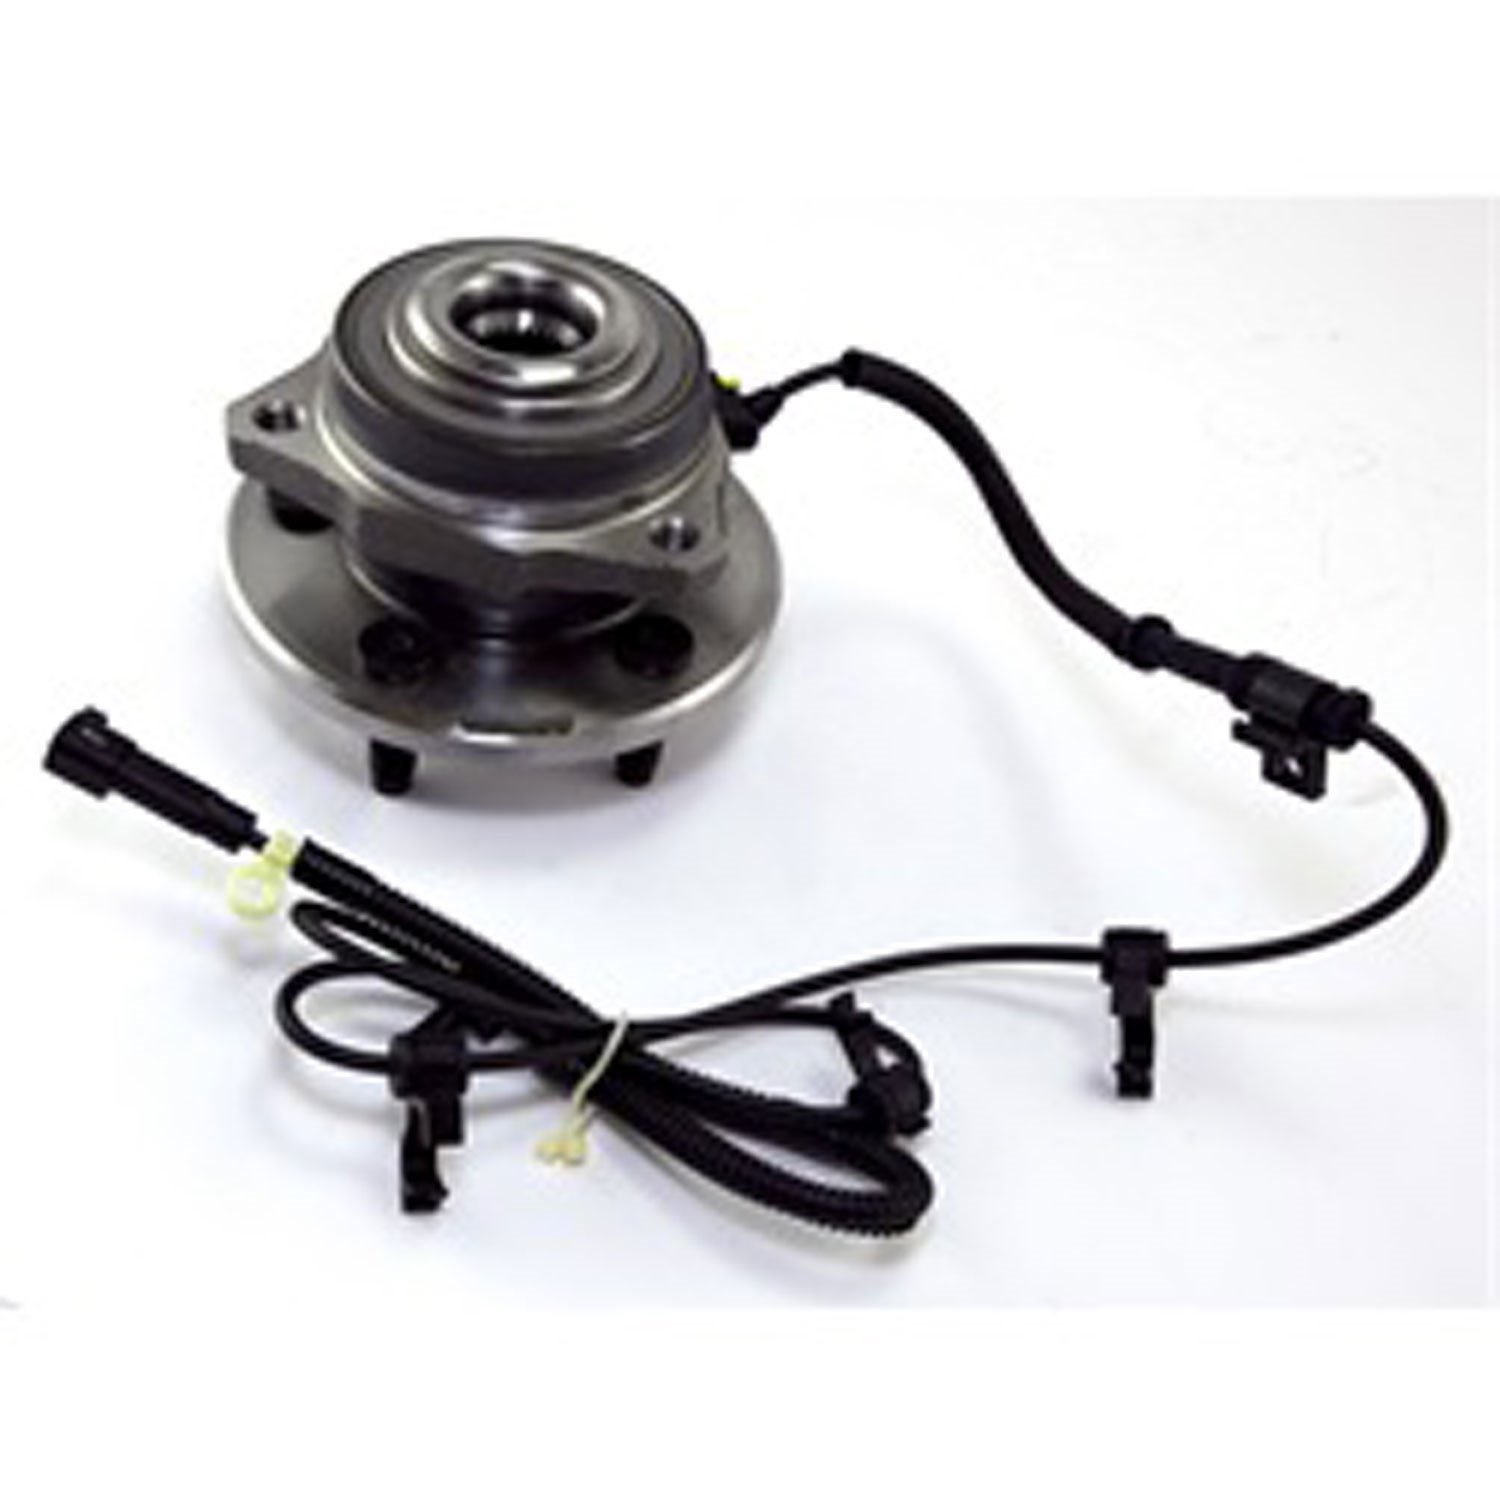 This front axle hub assembly from Omix-ADA fits 02-07 Jeep Liberty KJ with 4 wheel disc brakes and ABS right side only.